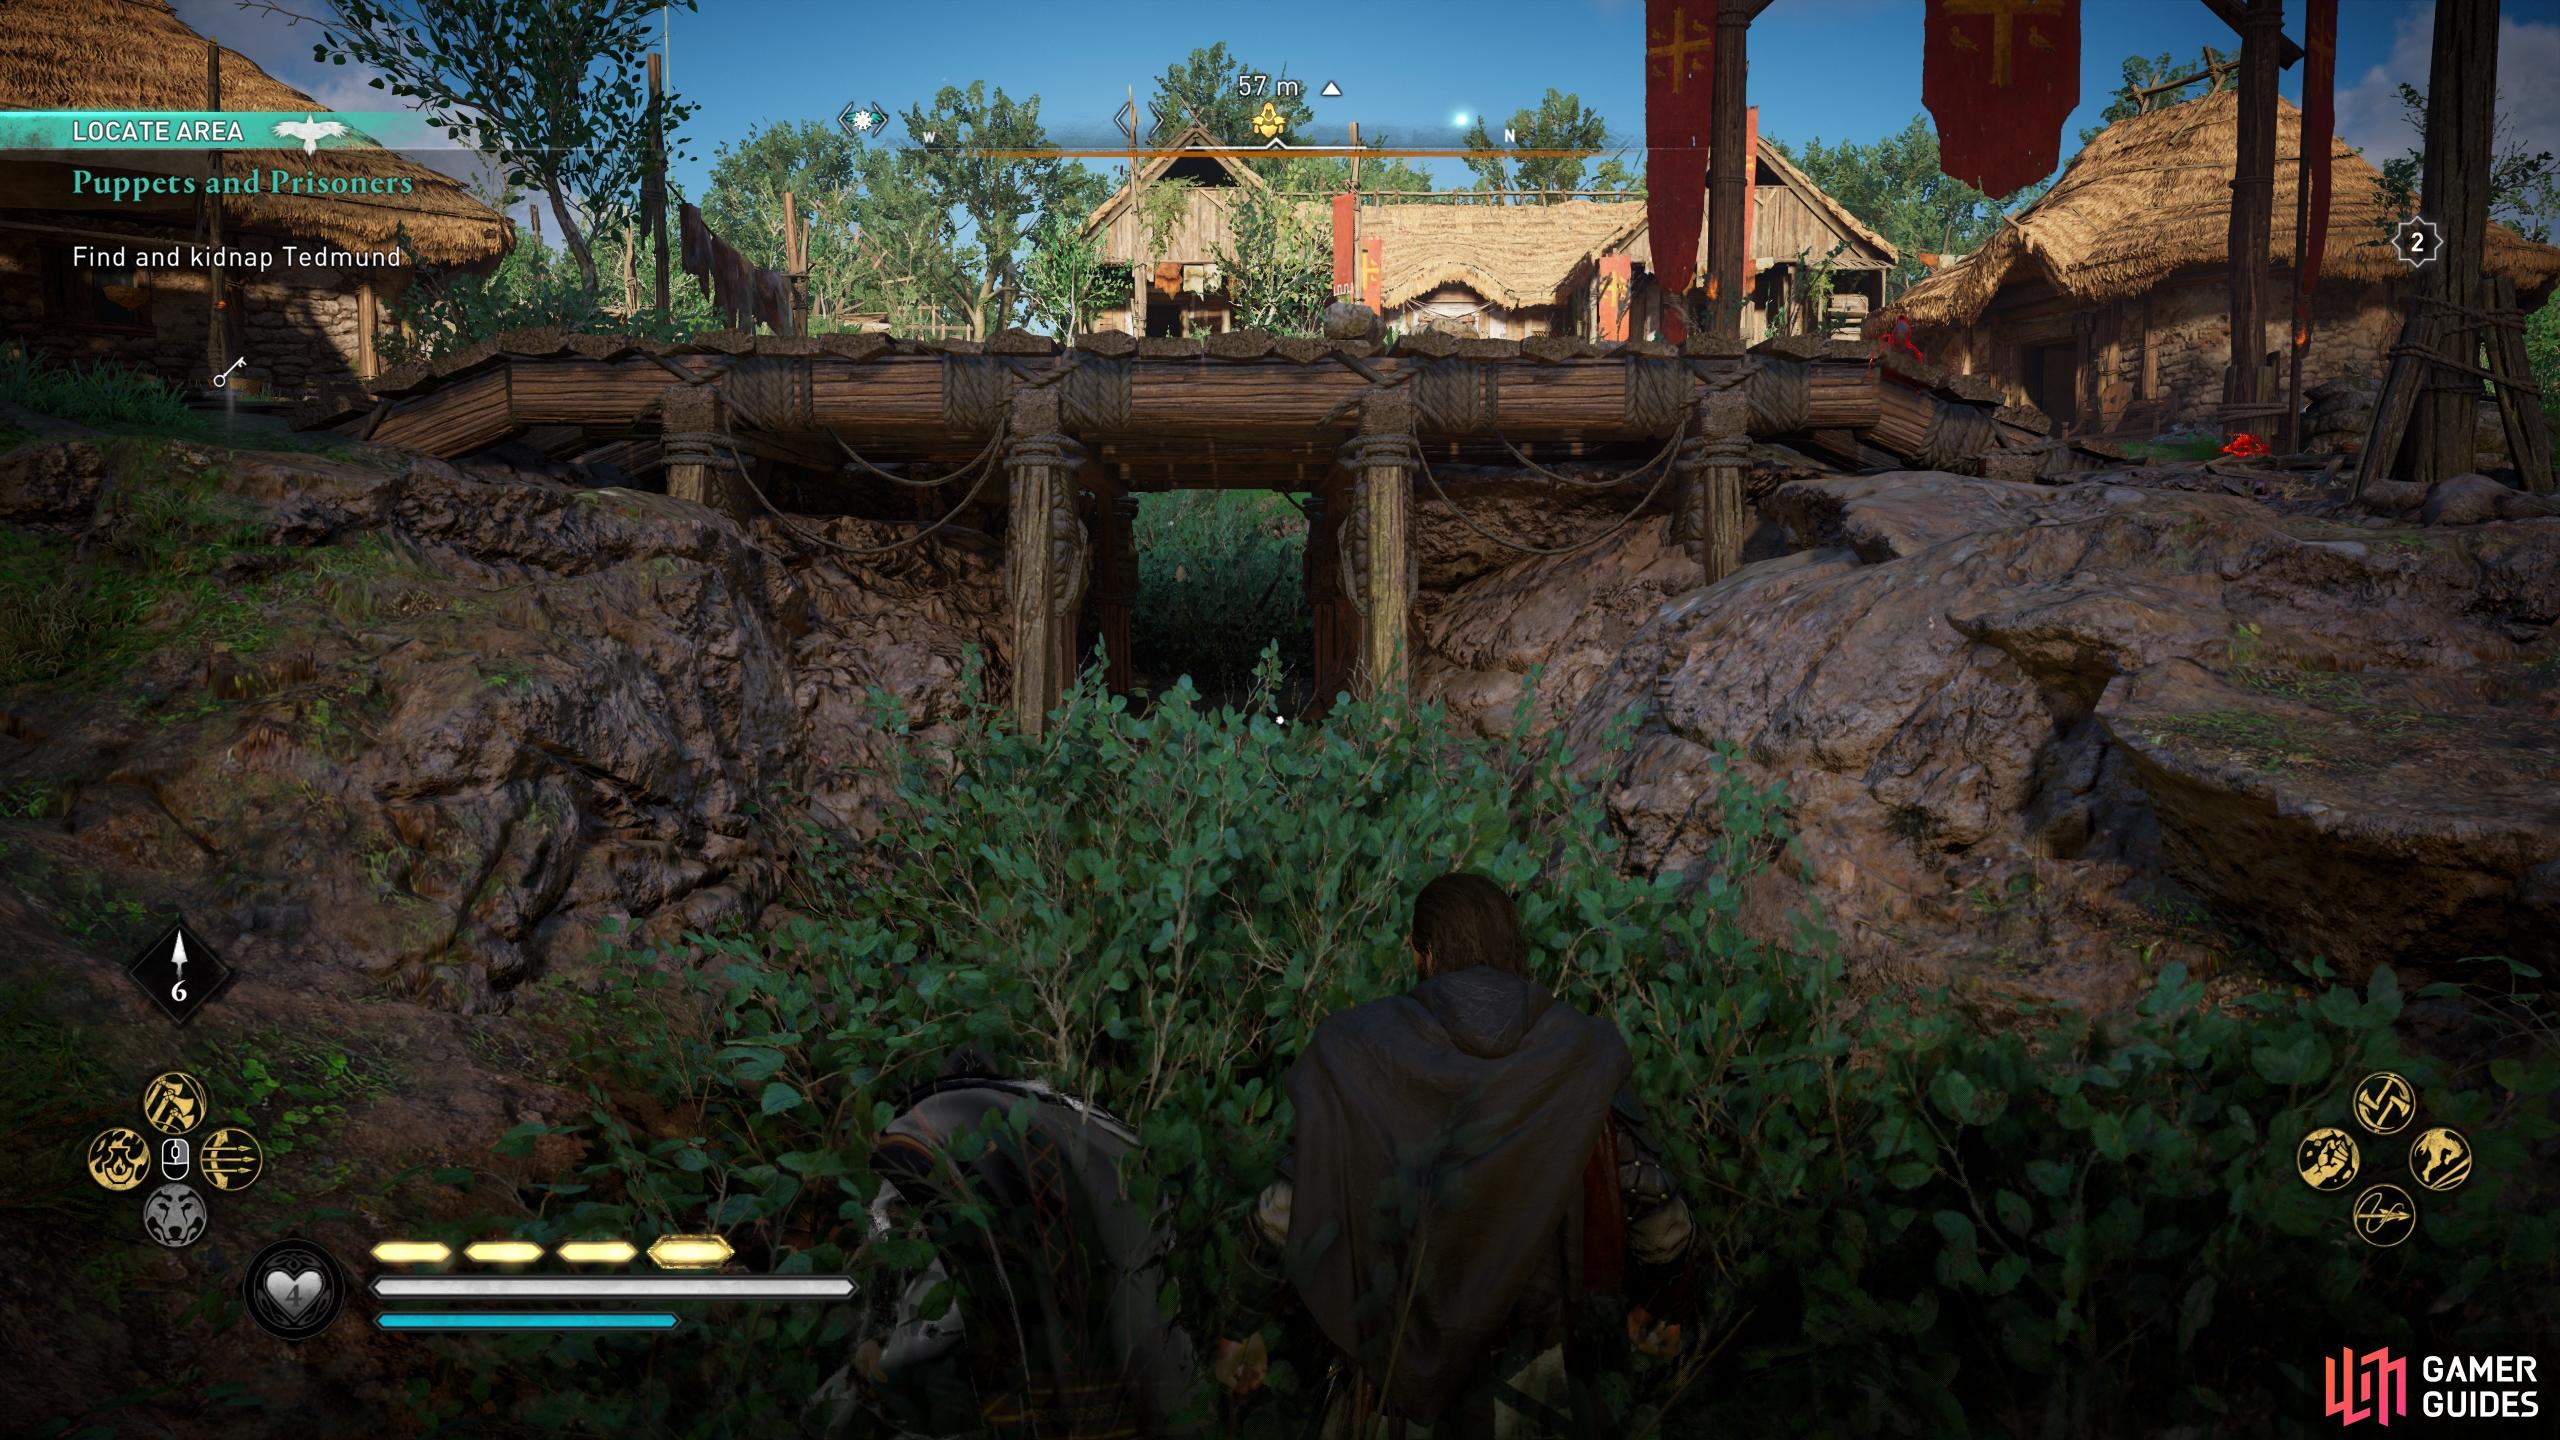 Use the tall foliage within Beamasfield to hide from the guards if you want to take a stealth approach.